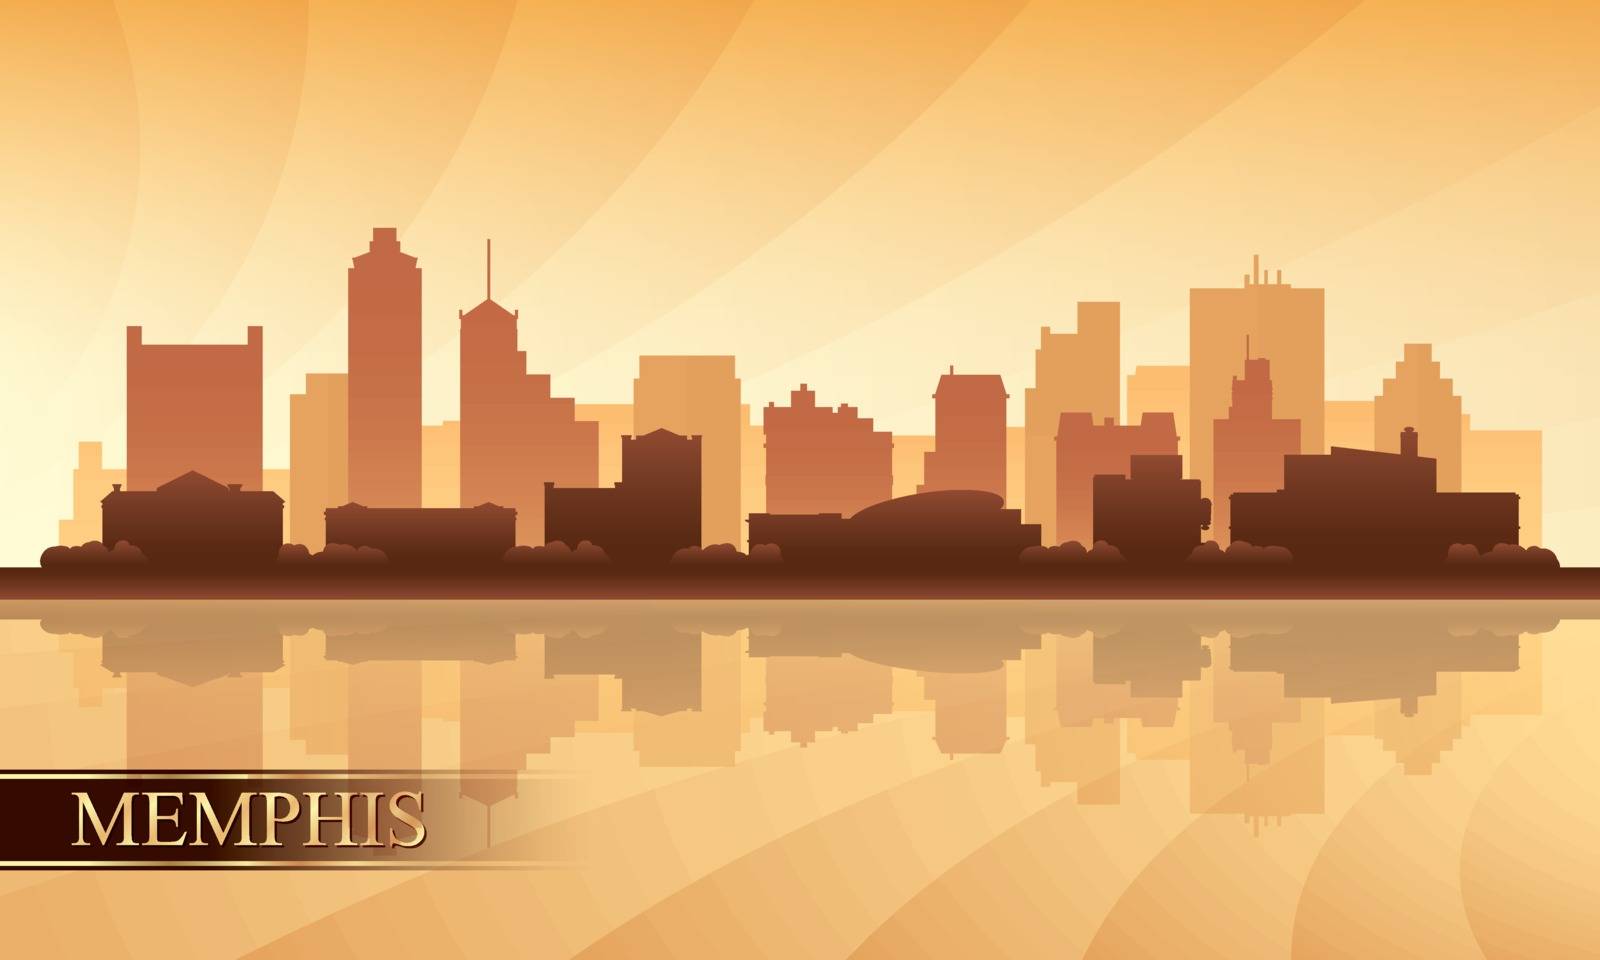 Memphis city skyline silhouette background by Ray_of_Light